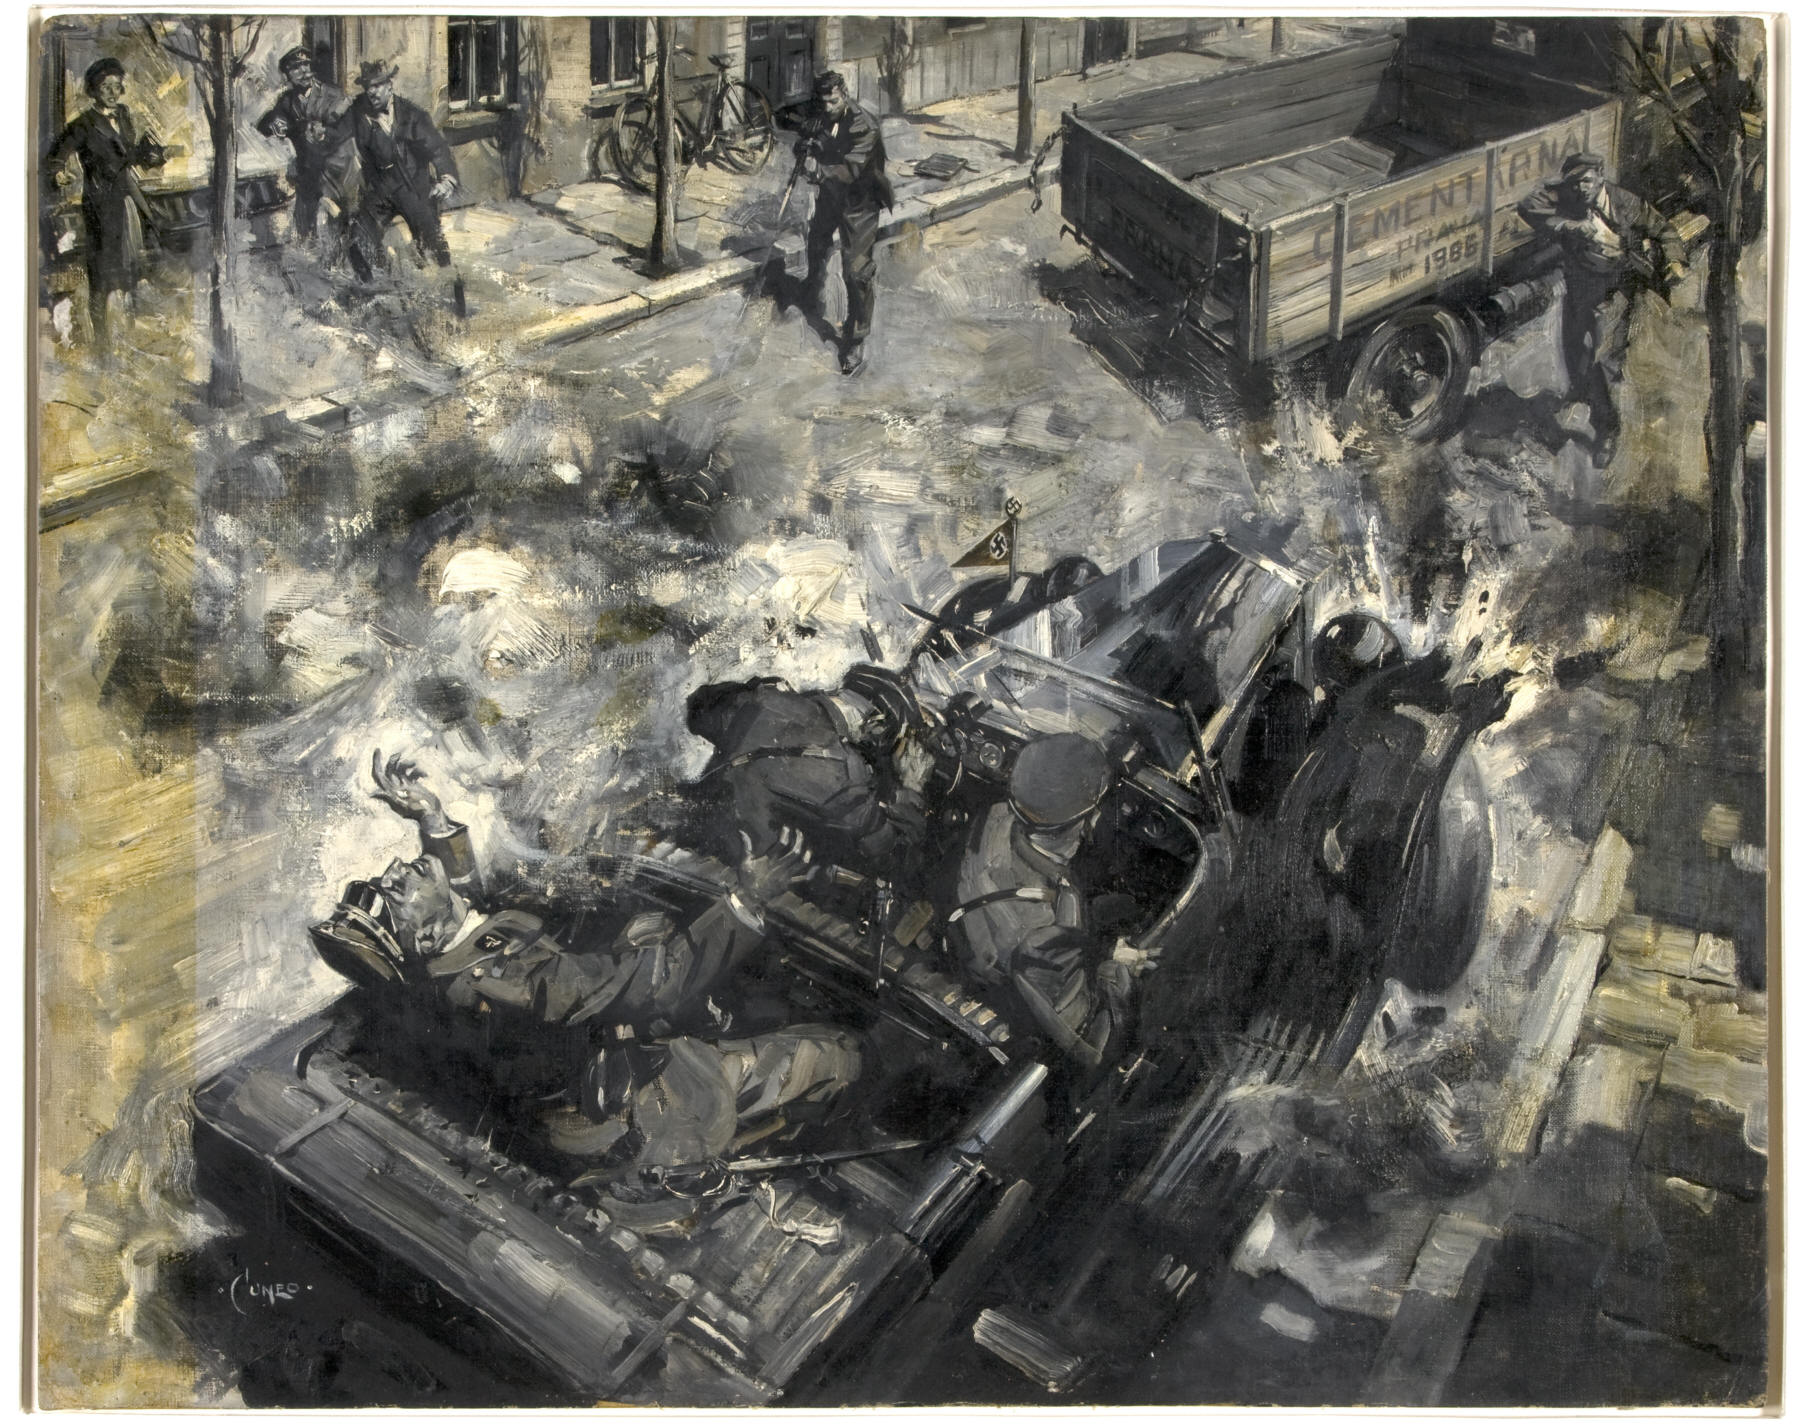 http://upload.wikimedia.org/wikipedia/commons/3/30/INF3-24_Assassination_of_Heydrich_Artist_Terence_Cuneo_1939-1946.jpg